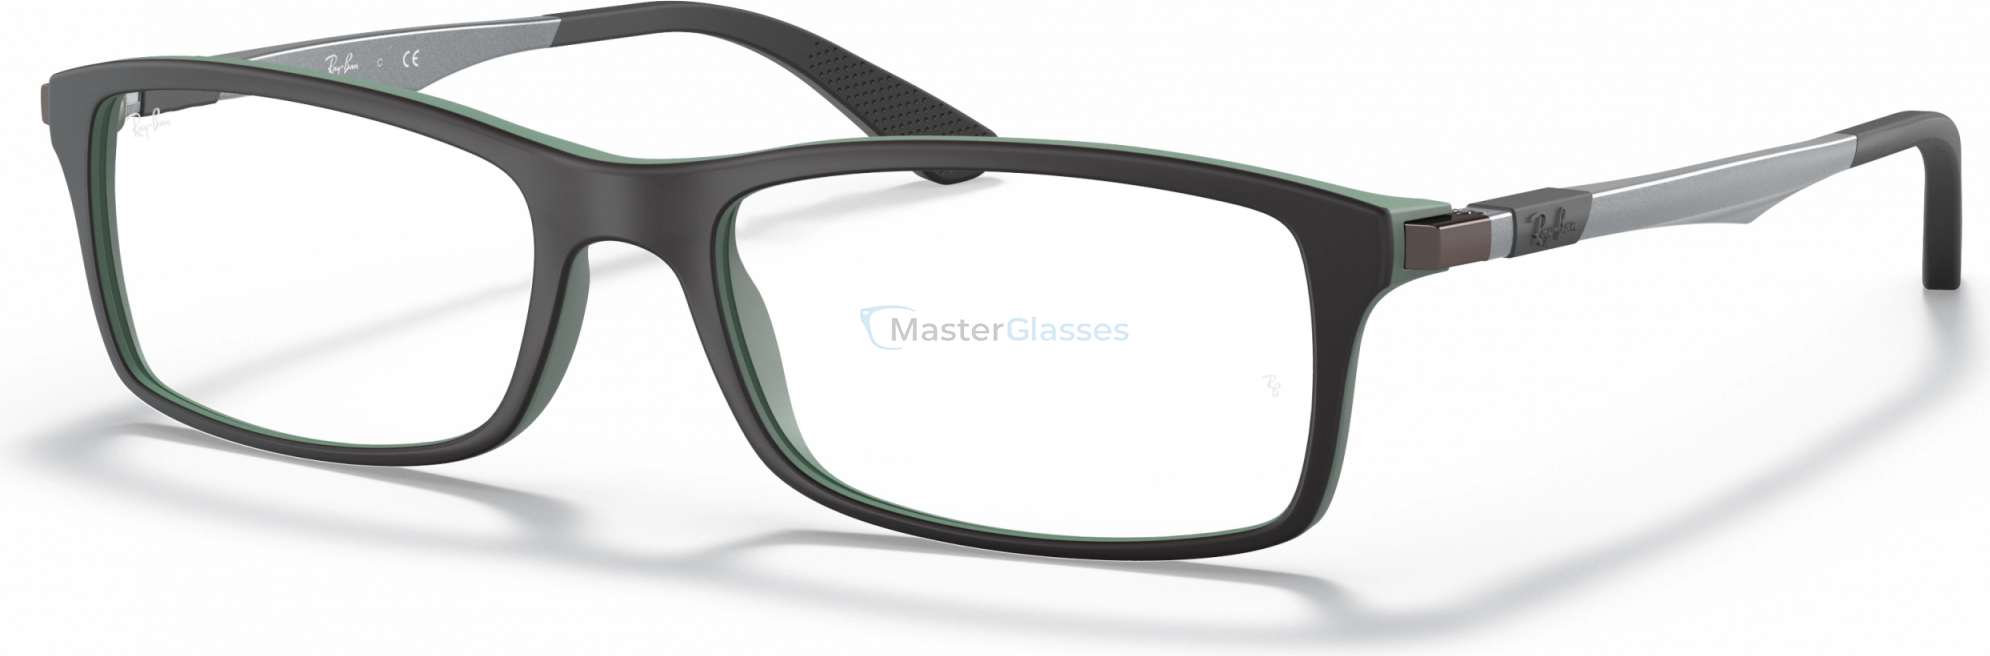  Ray-Ban RX7017 5197 Top Black On Green